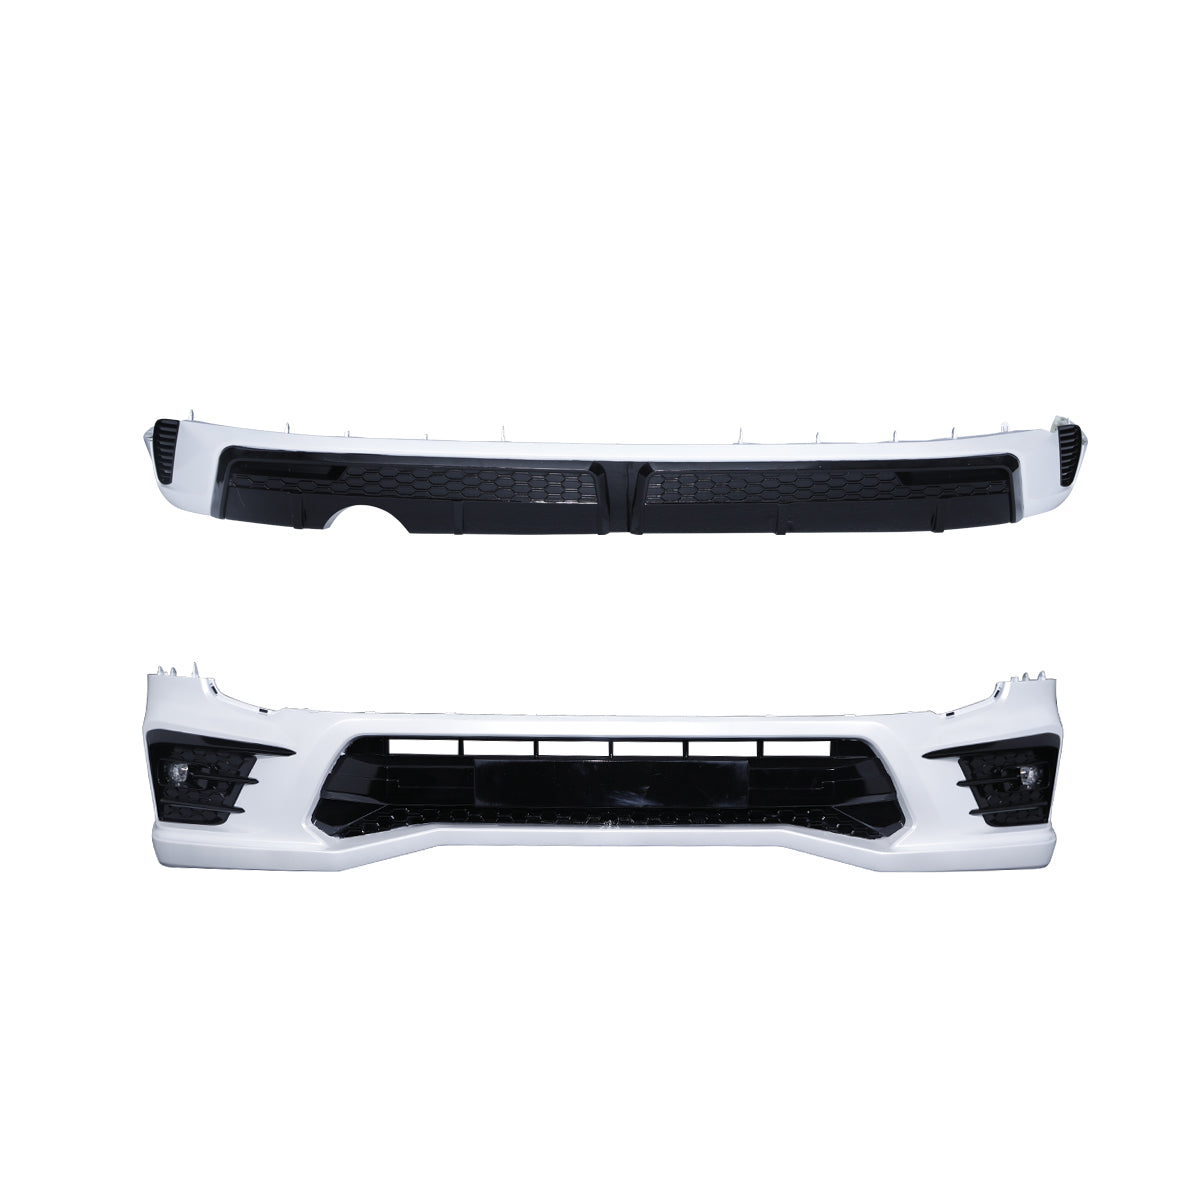 MODELLISTA(MIDDLE EAST) TYPE BODY KIT FOR LC300 2022